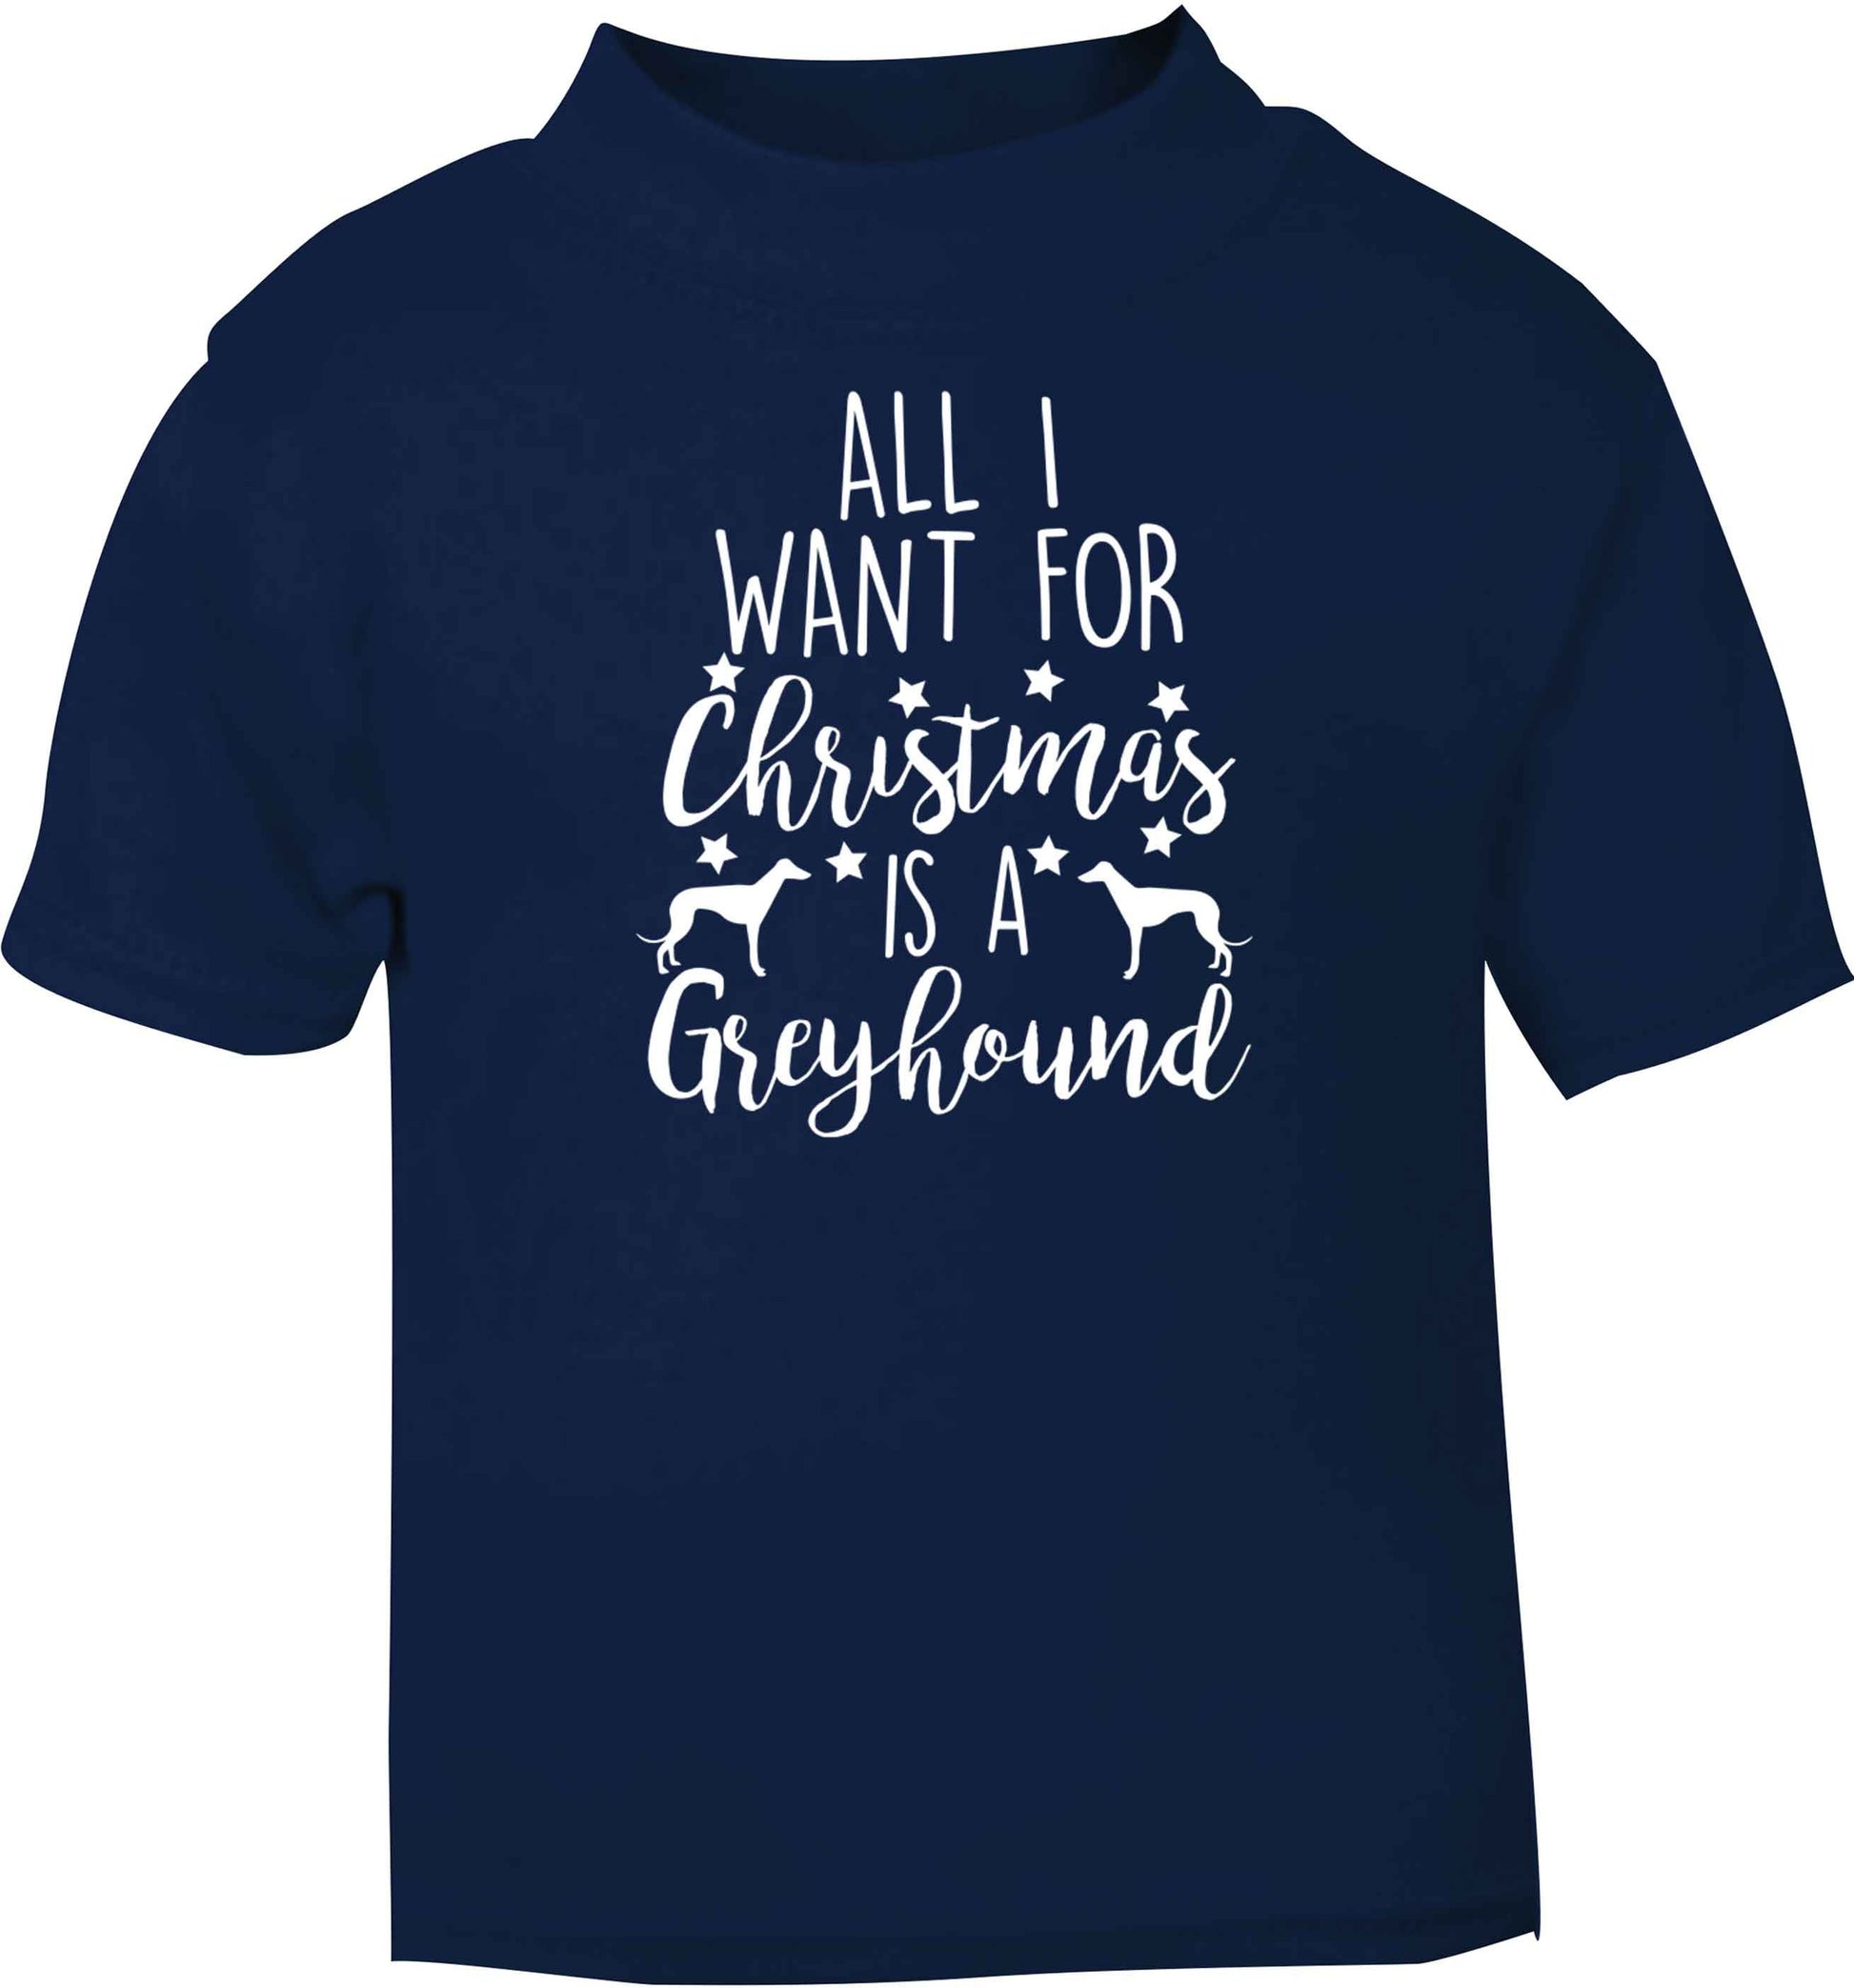 All I want for Christmas is a greyhound navy baby toddler Tshirt 2 Years